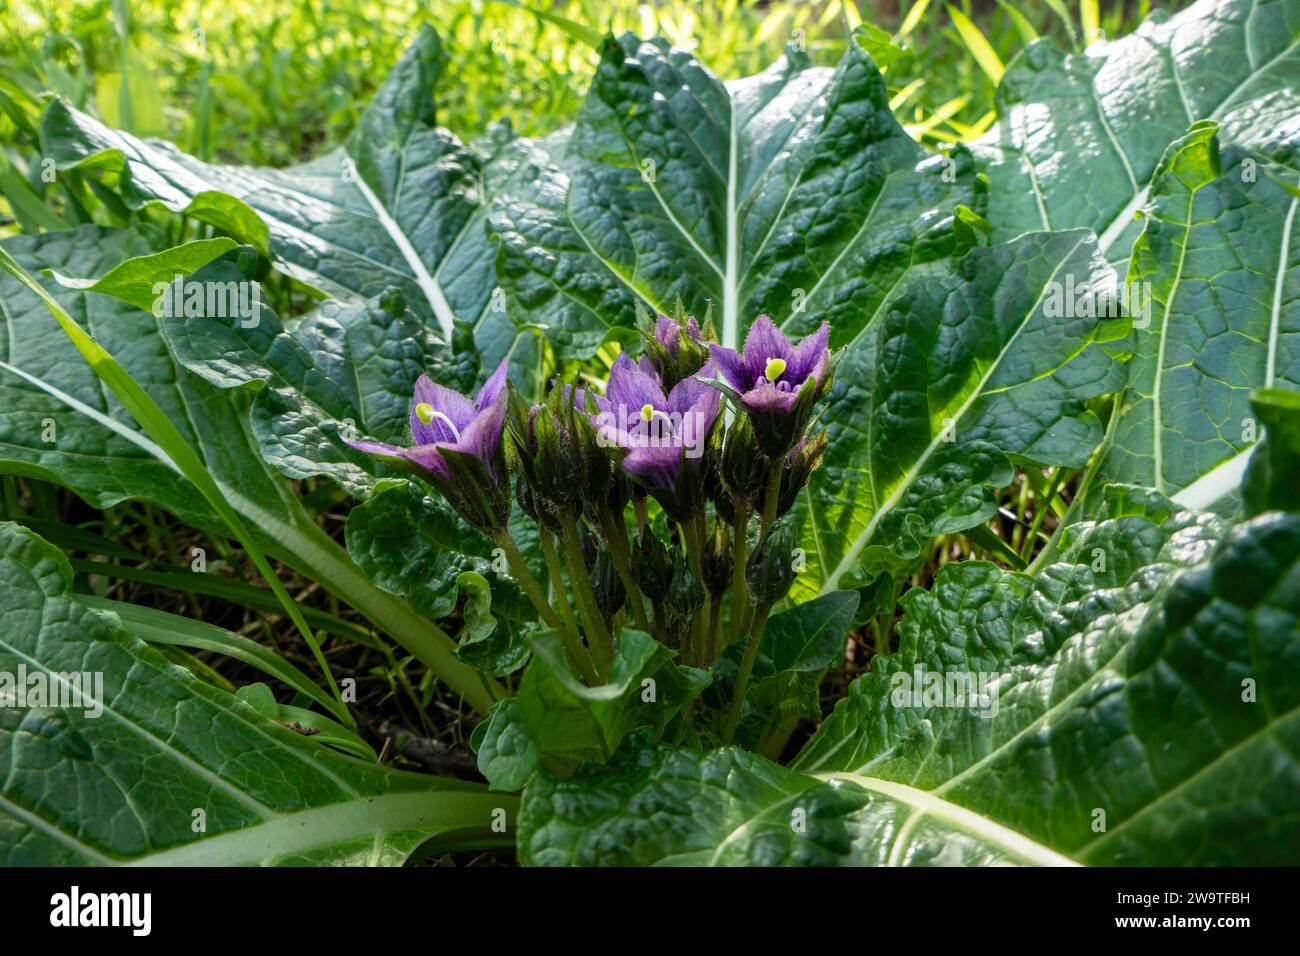 Violet flowers of wild Mandragora plant among green leaves close-up Stock Photo